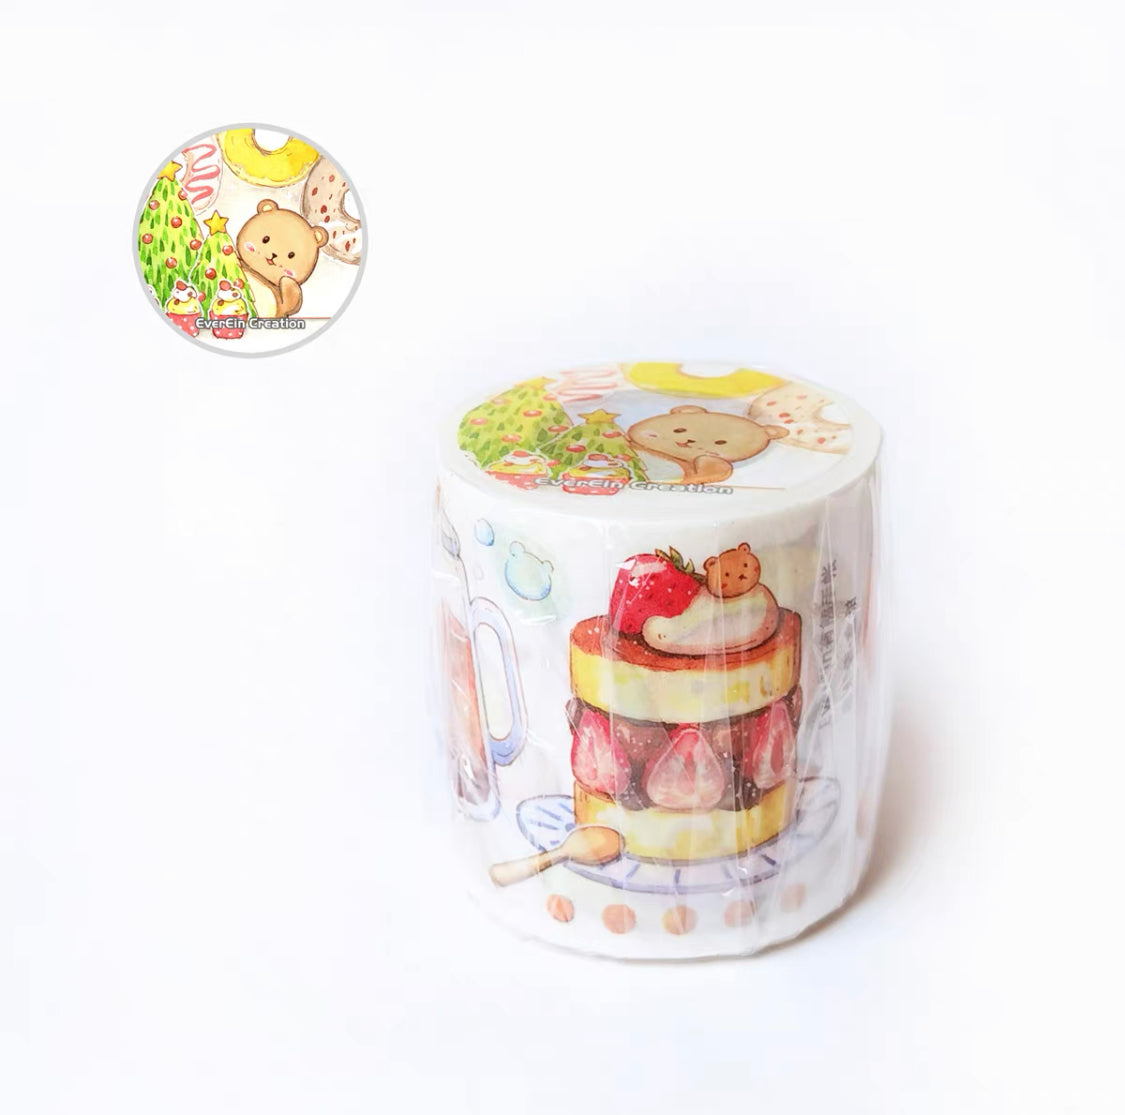 Ever&Ein tea time and sweet time washitape and sticker pack